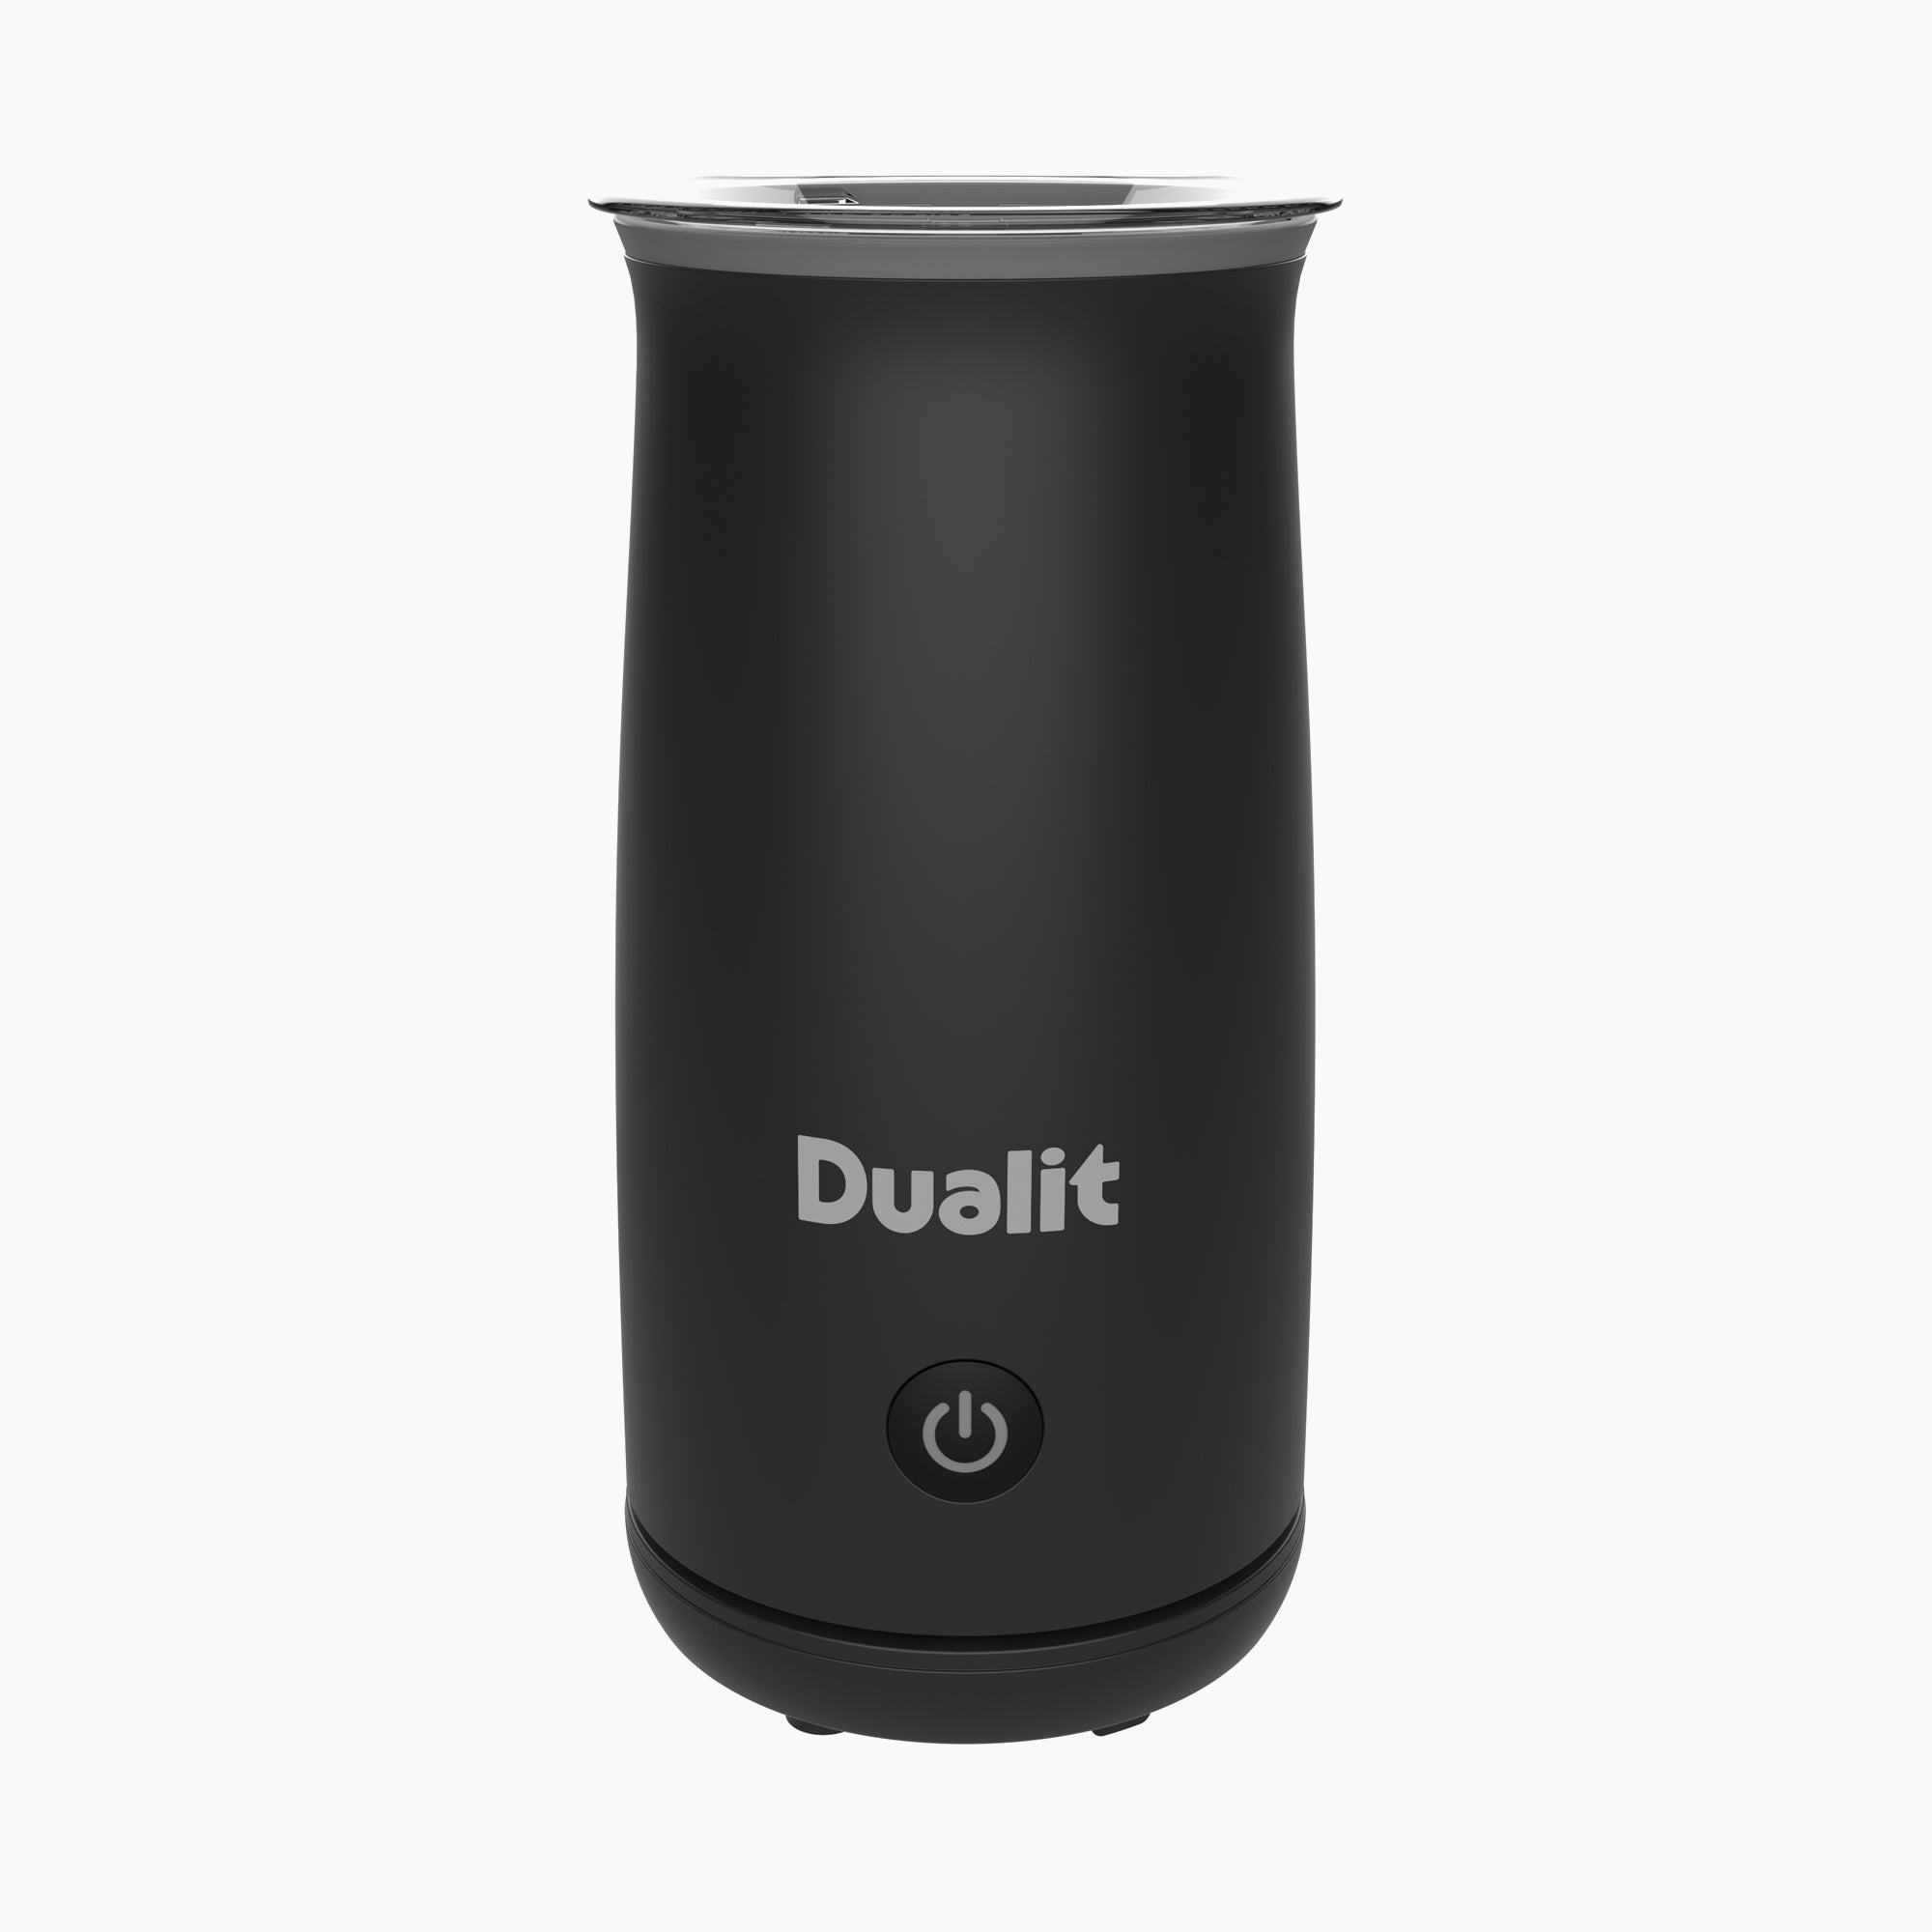 Dualit Hot/Cold Milk Frother, Piano Black Steel